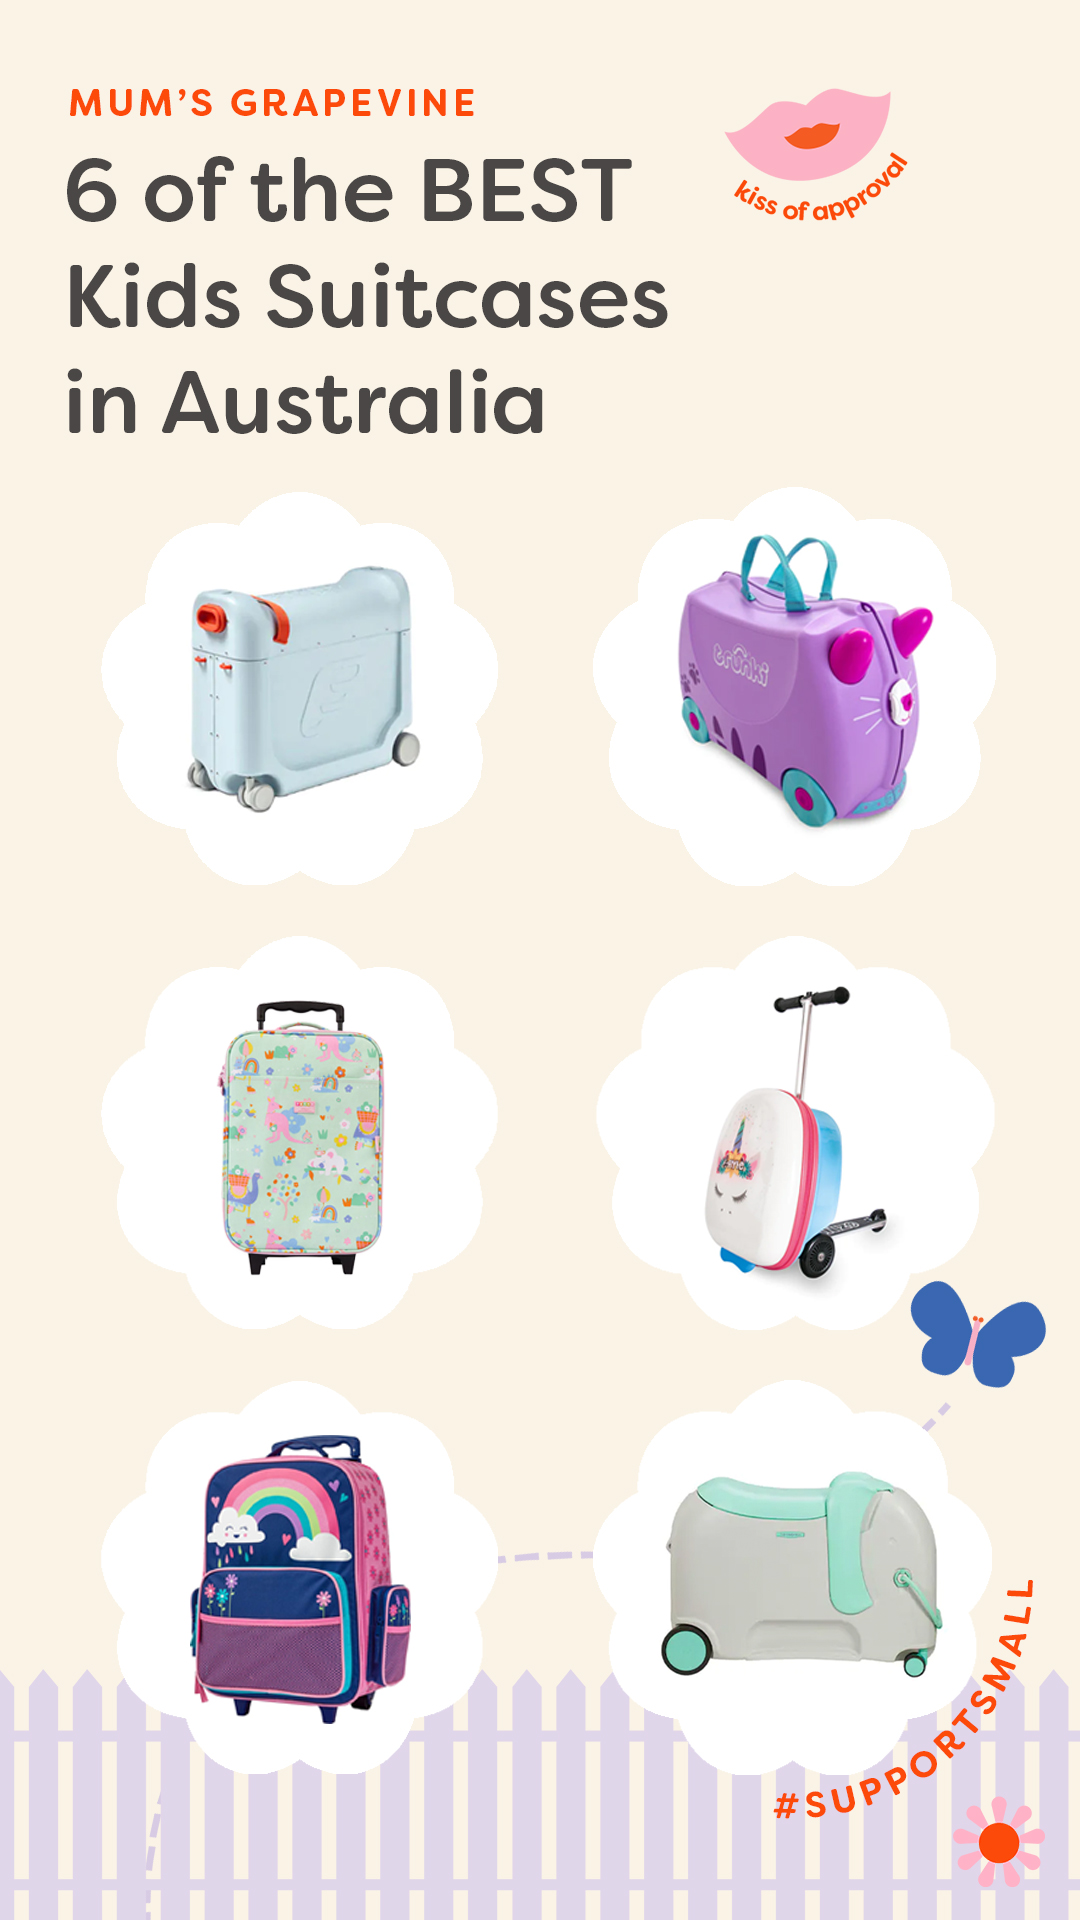 6 of the best Kids suitcases and luggage in Australia